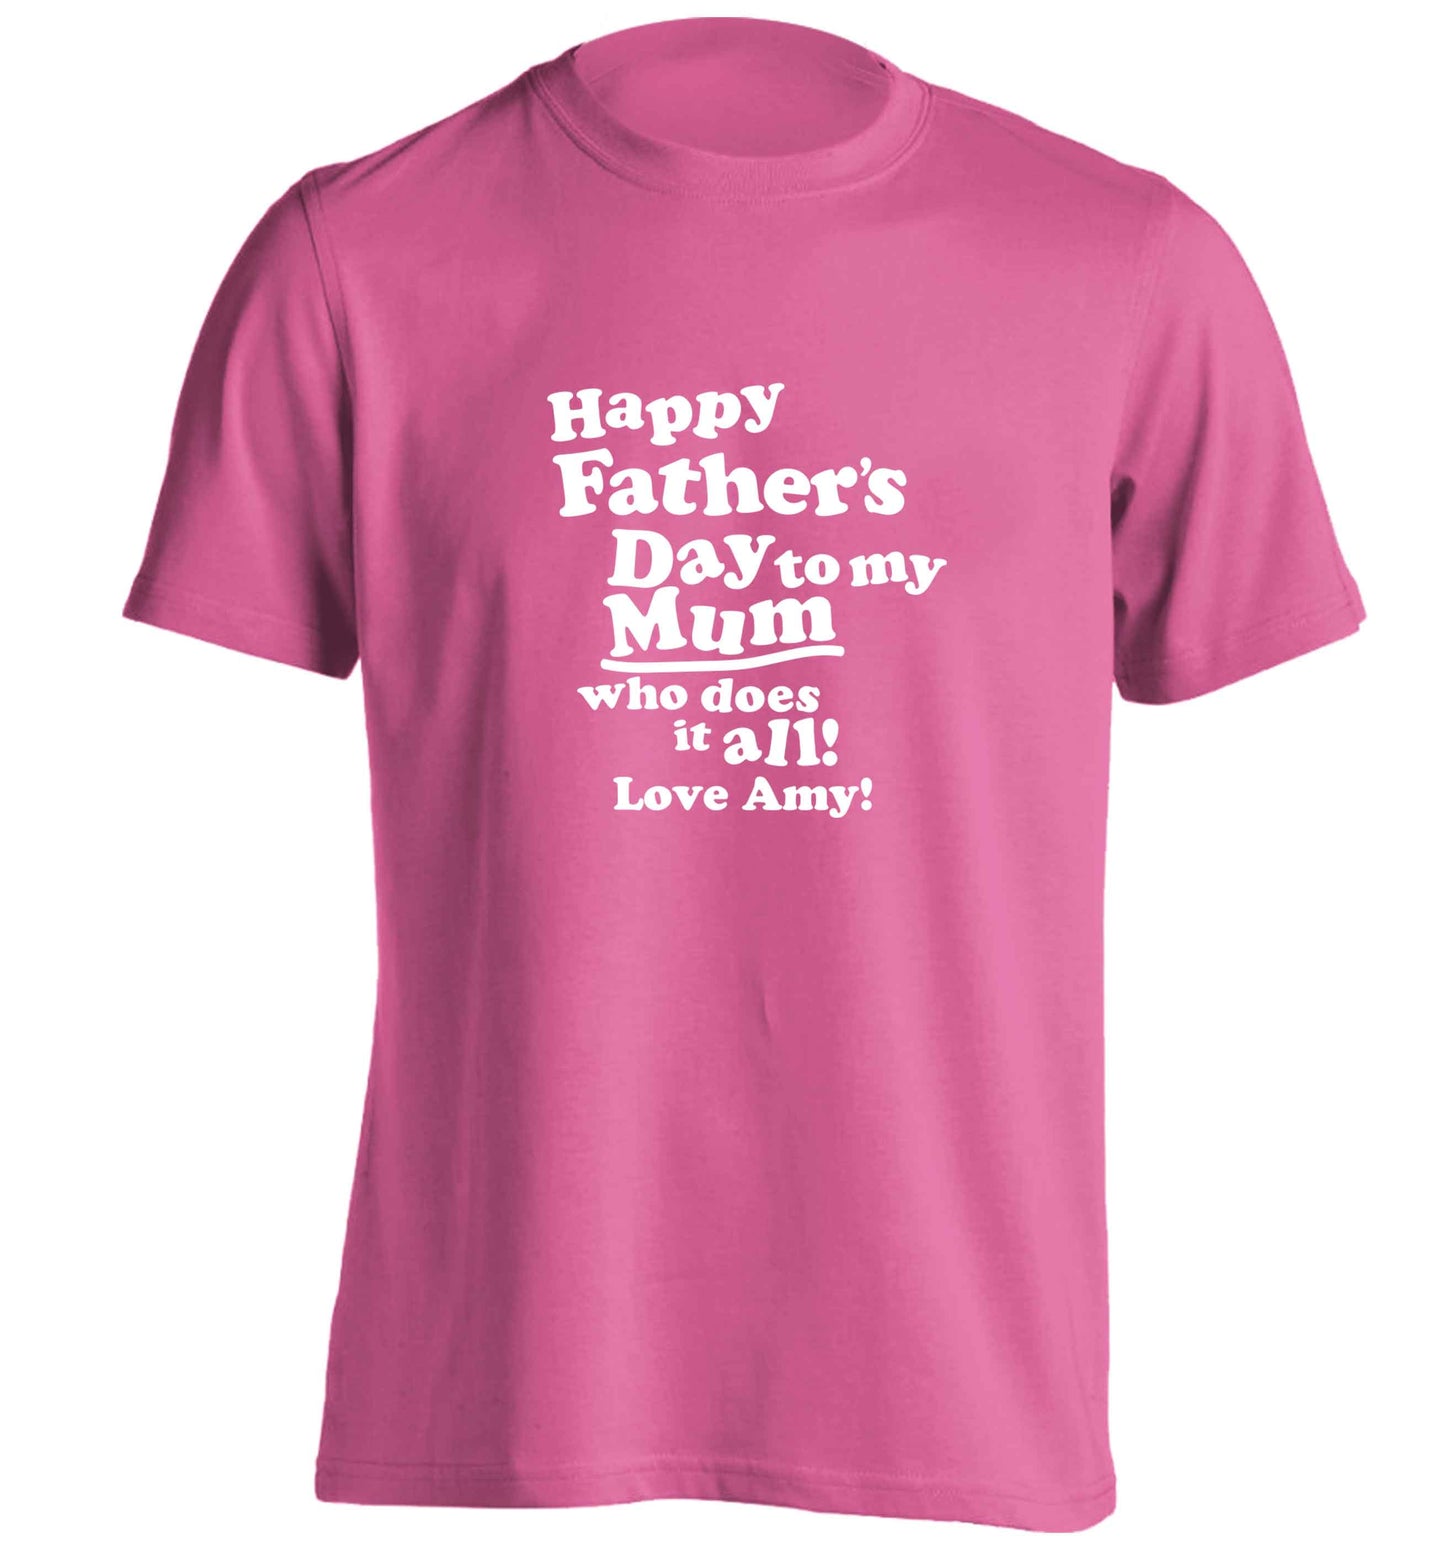 Happy Father's day to my mum who does it all adults unisex pink Tshirt 2XL